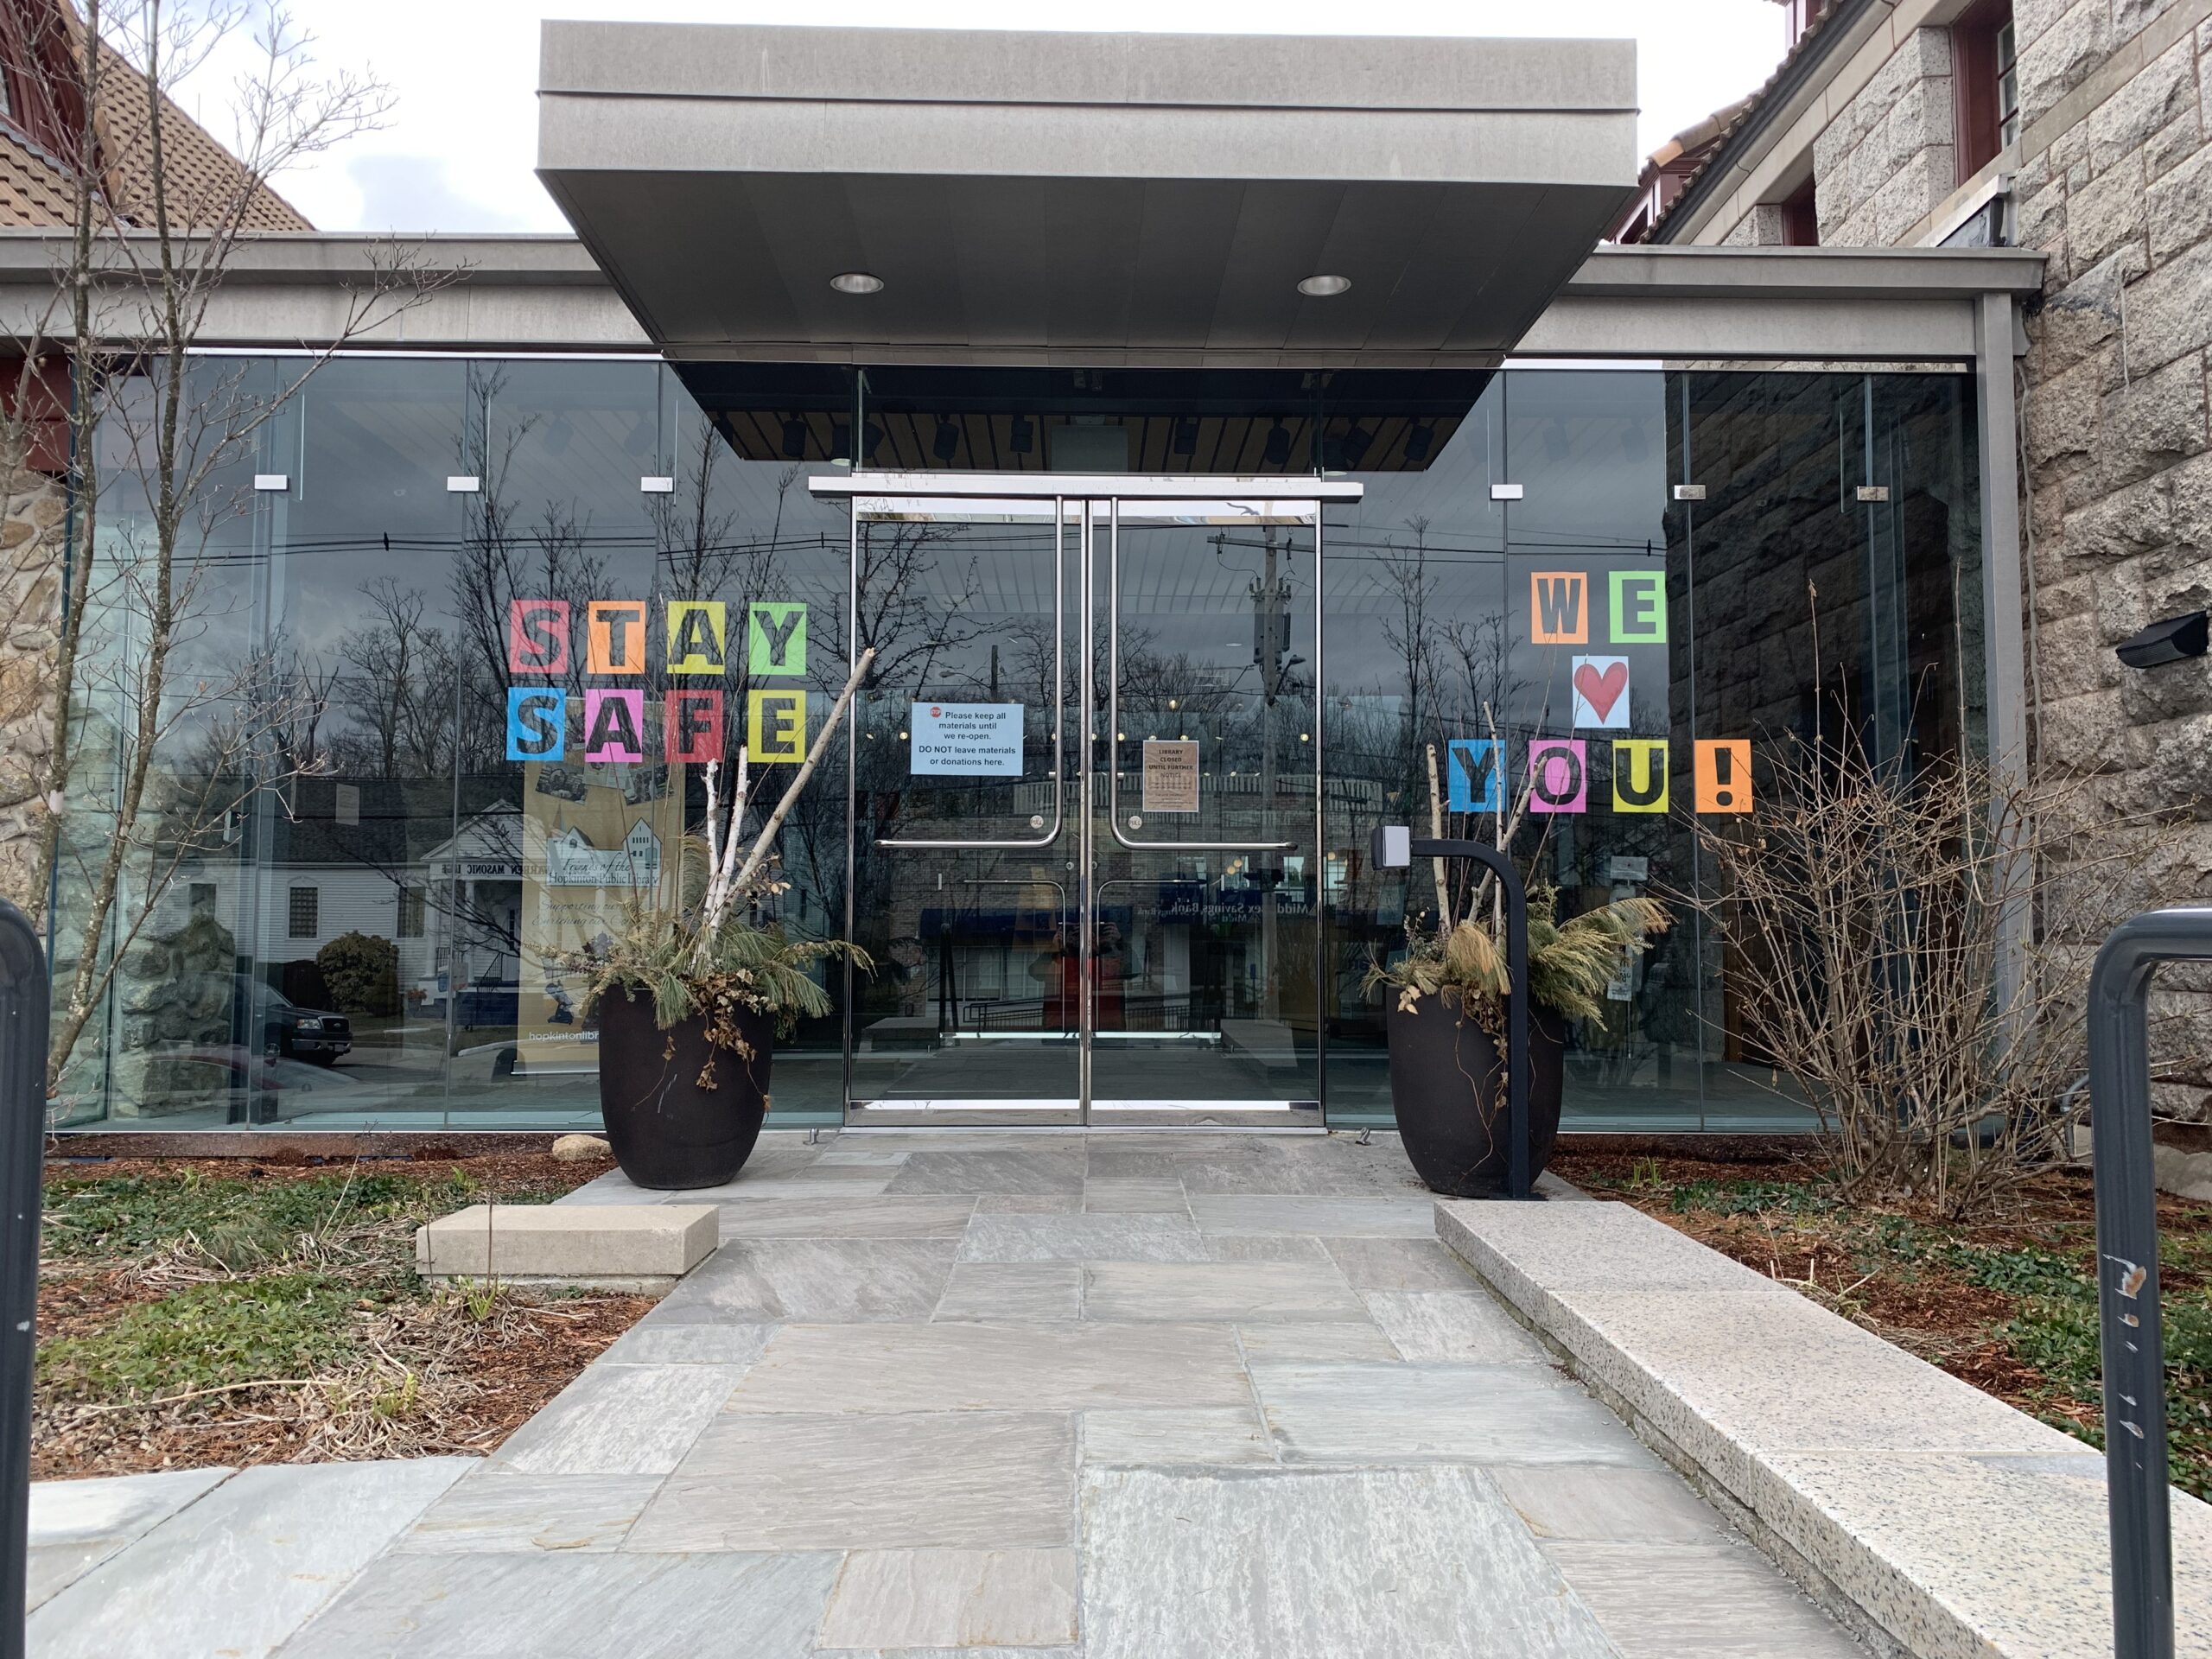 Hopkinton Public Library signs show support for town